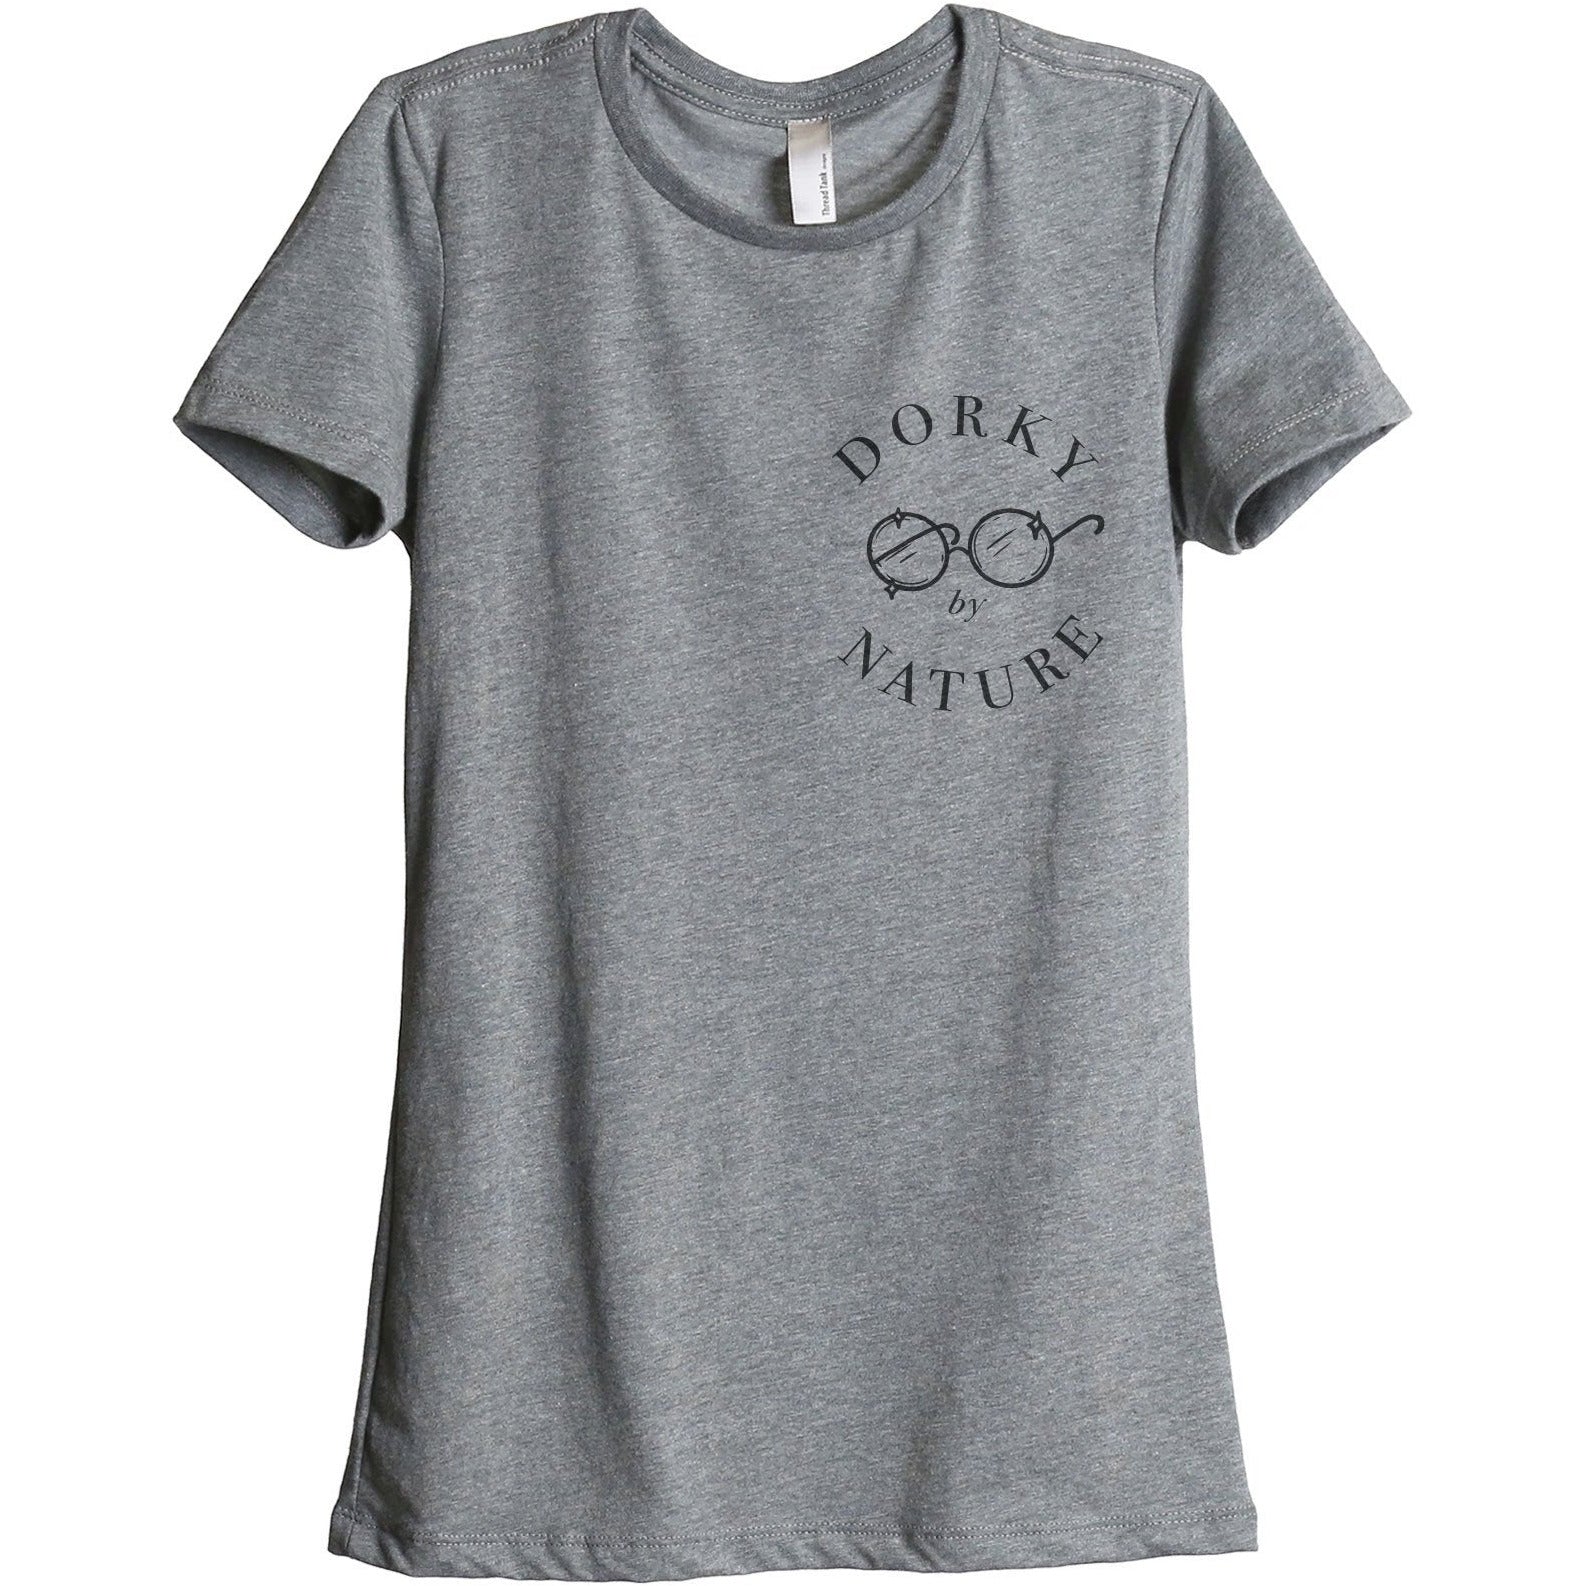 Dorky By Nature Women's Relaxed Crewneck T-Shirt Top Tee Heather Grey